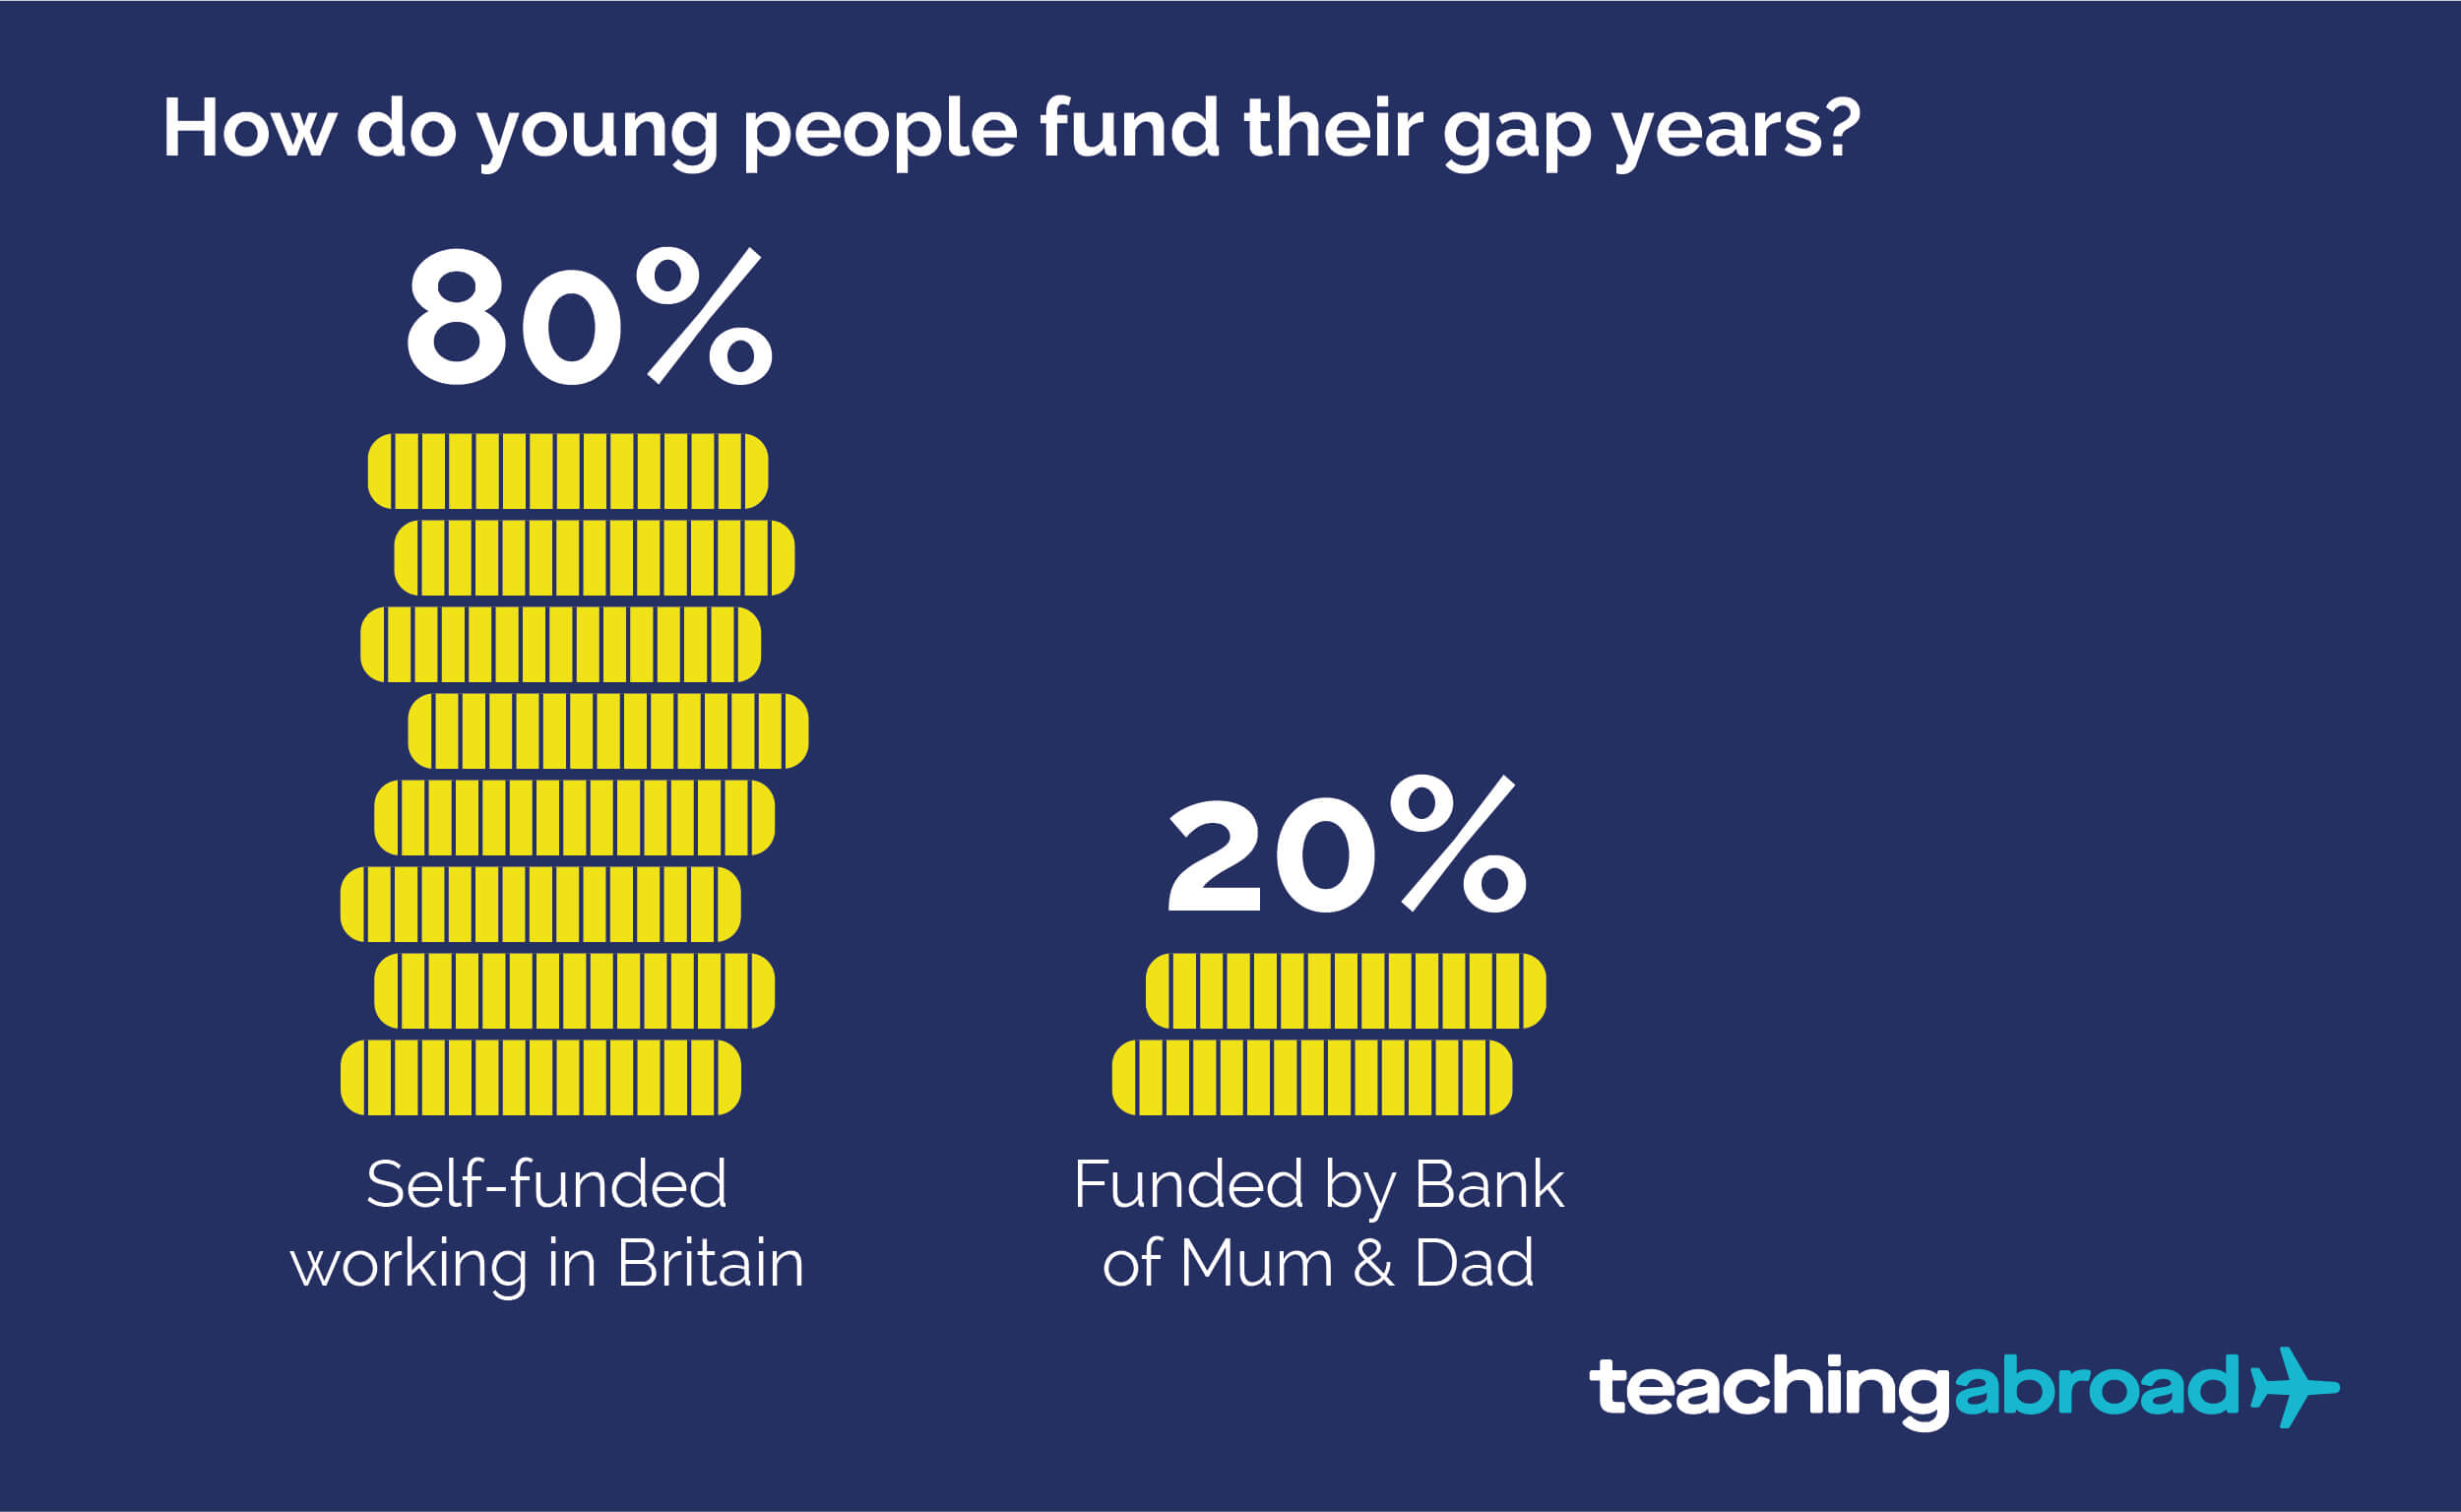 80% of people fund their own gap years, 20% rely on parents